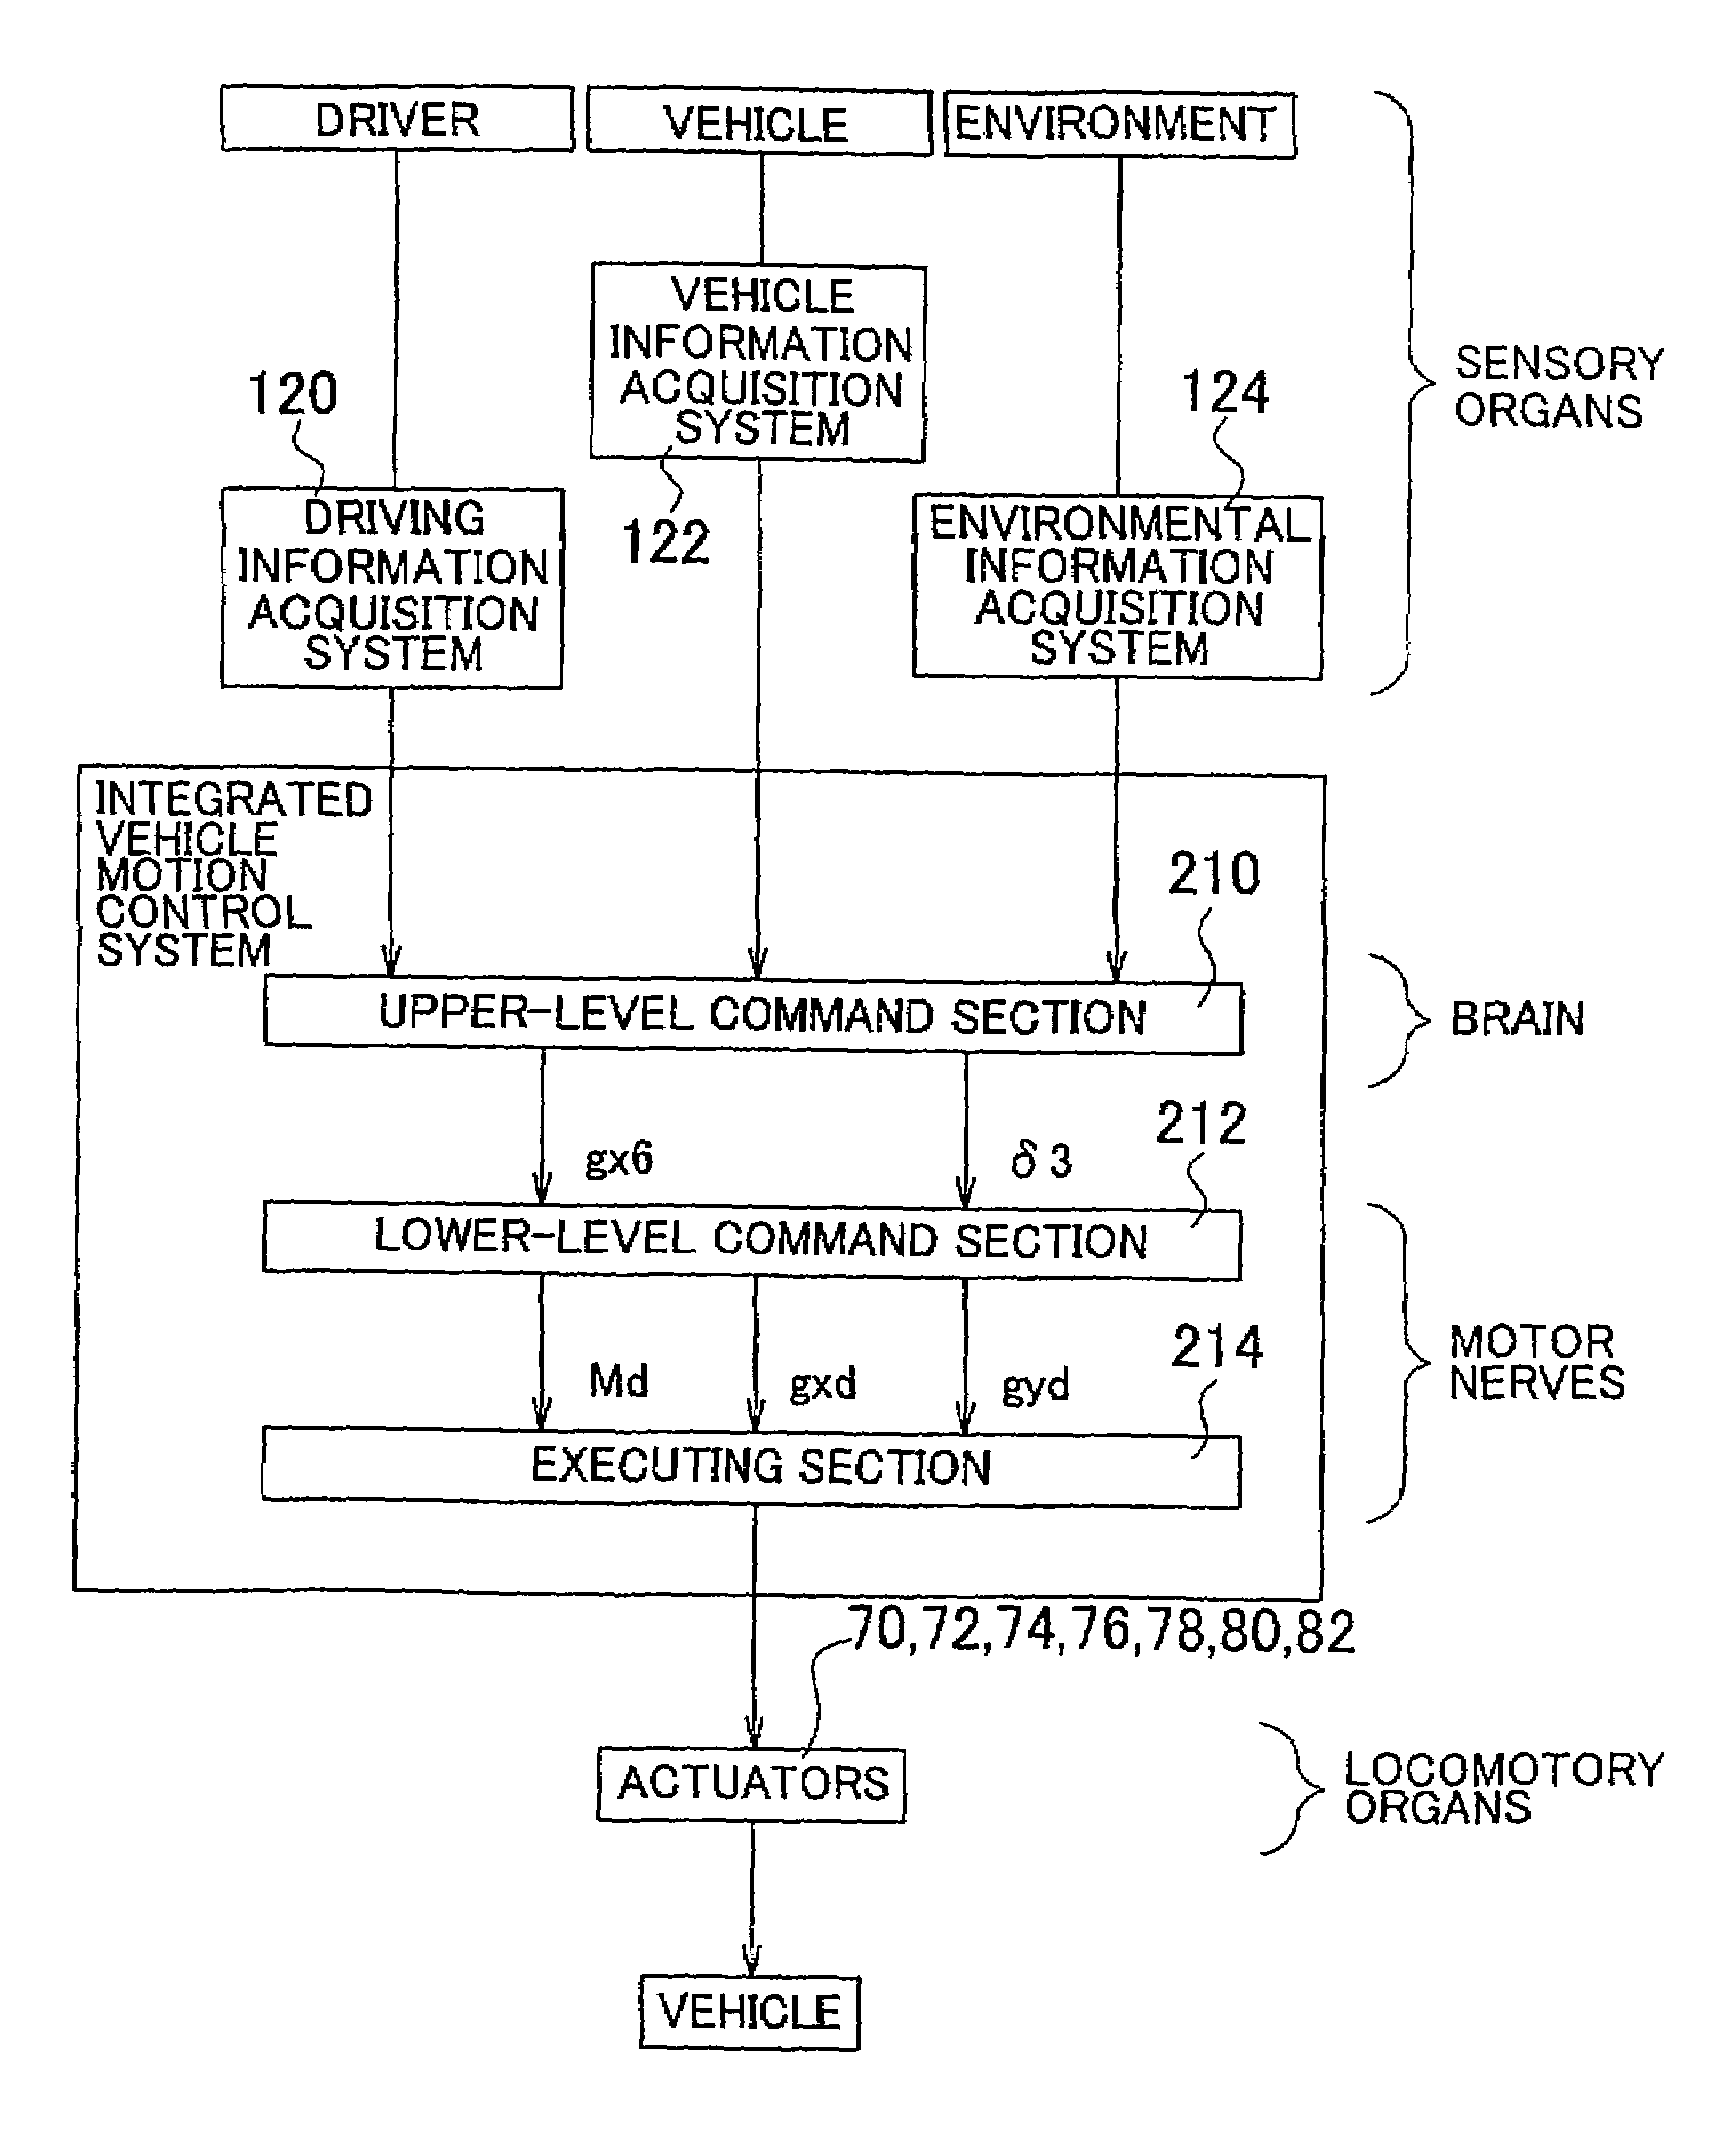 Integrated vehicle motion control system